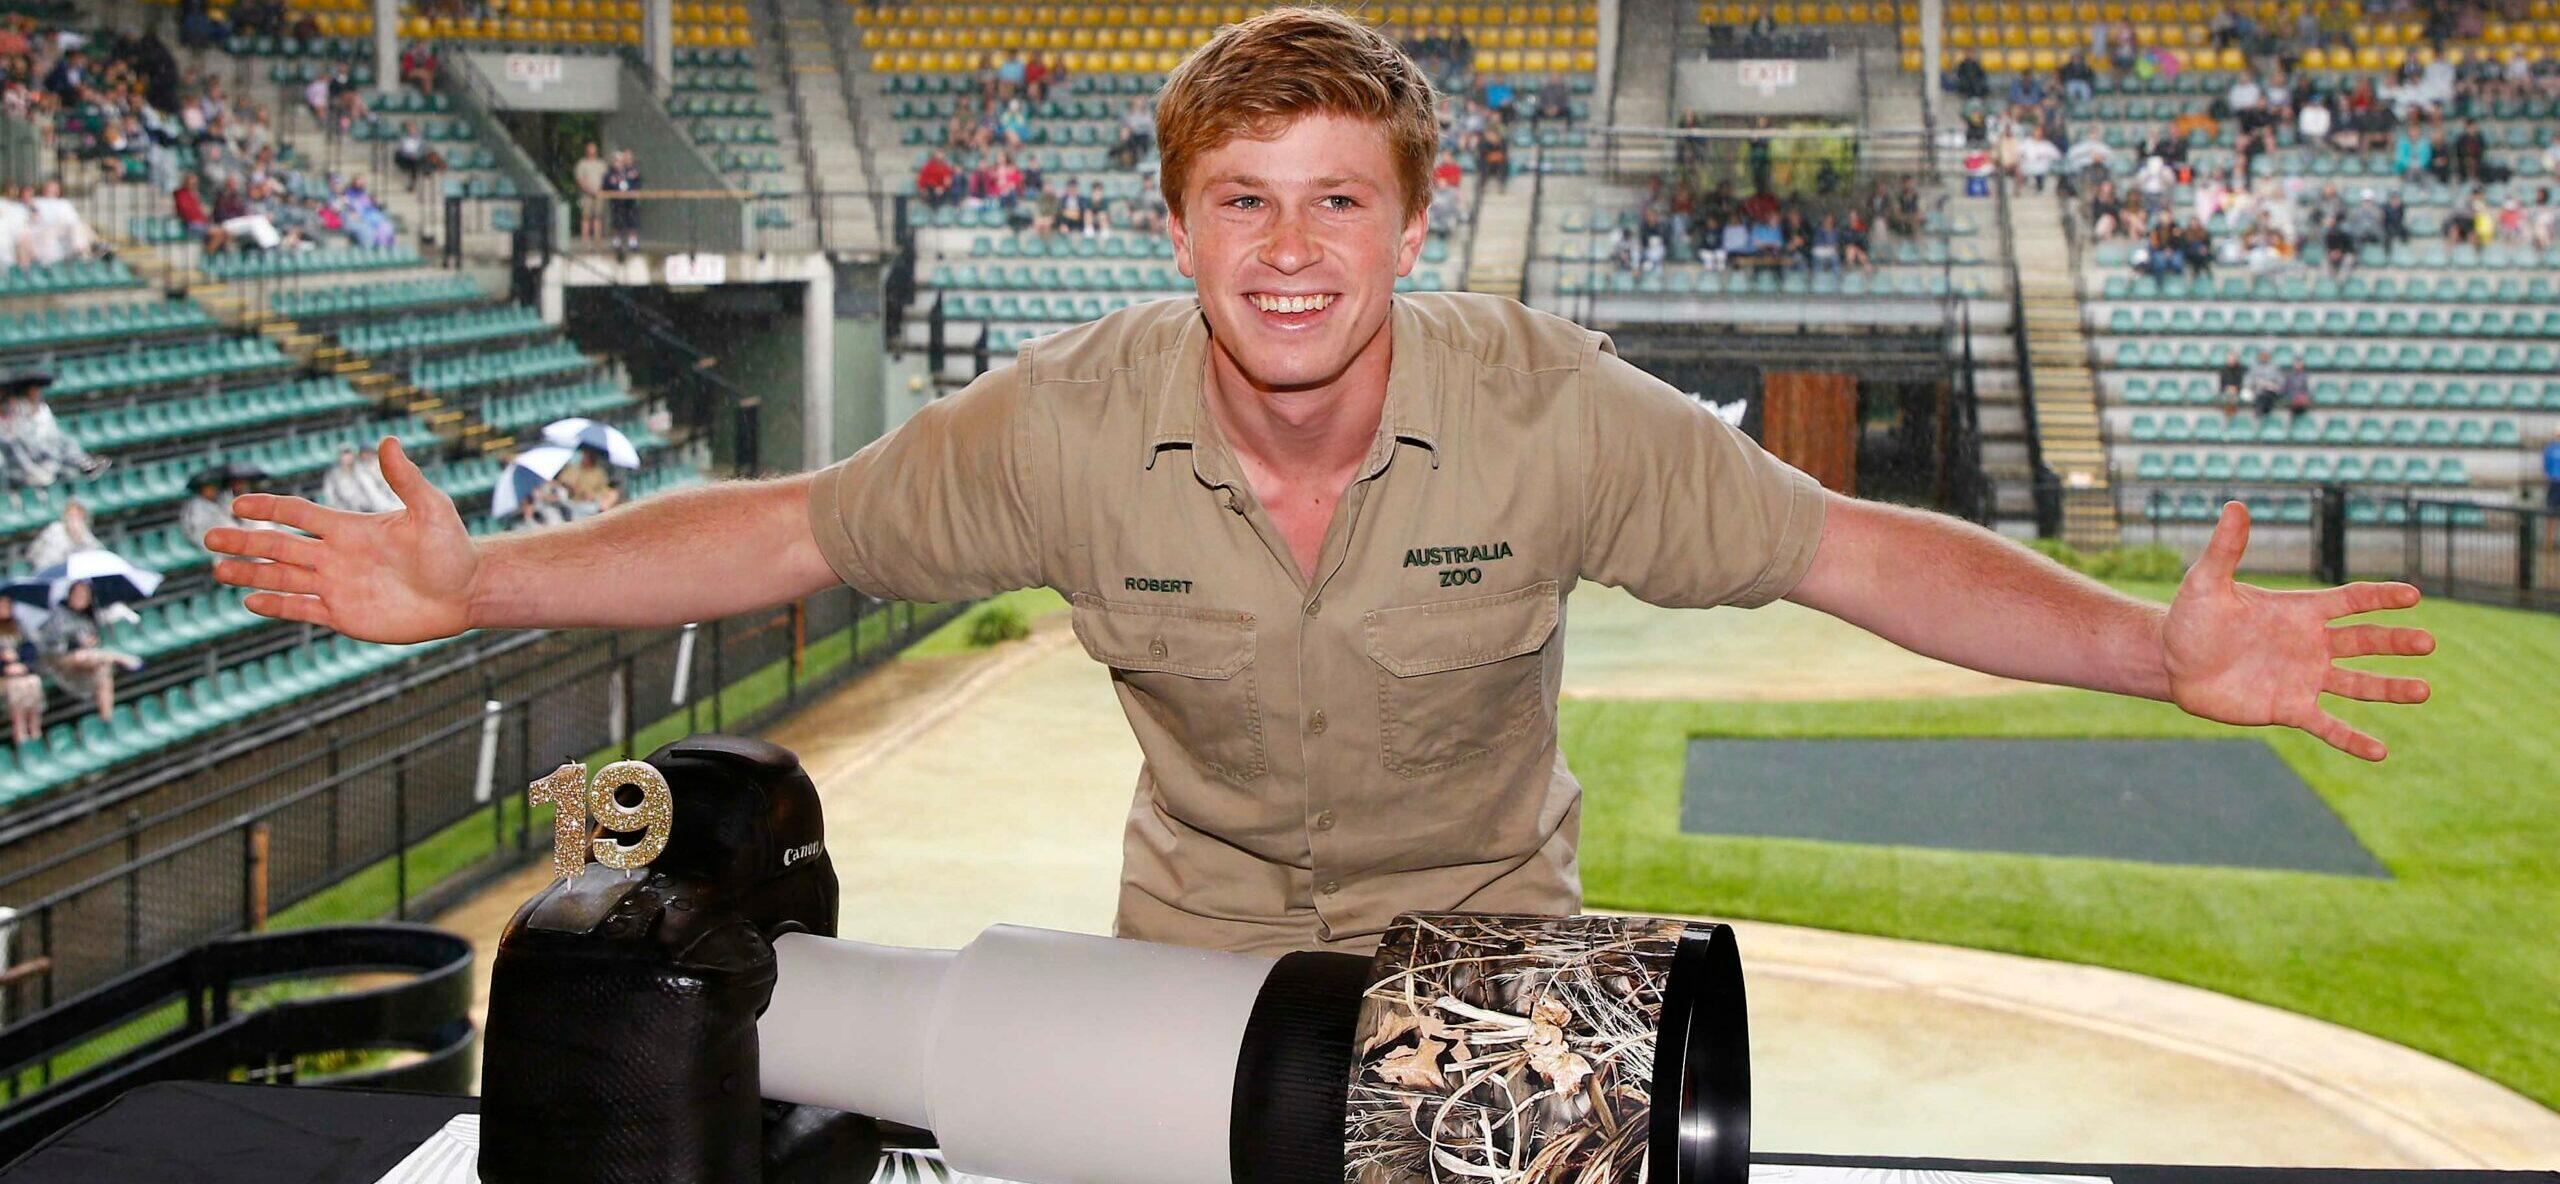 Robert Irwin Breaks Down After Getting Message From Steve Irwin For 19th Birthday